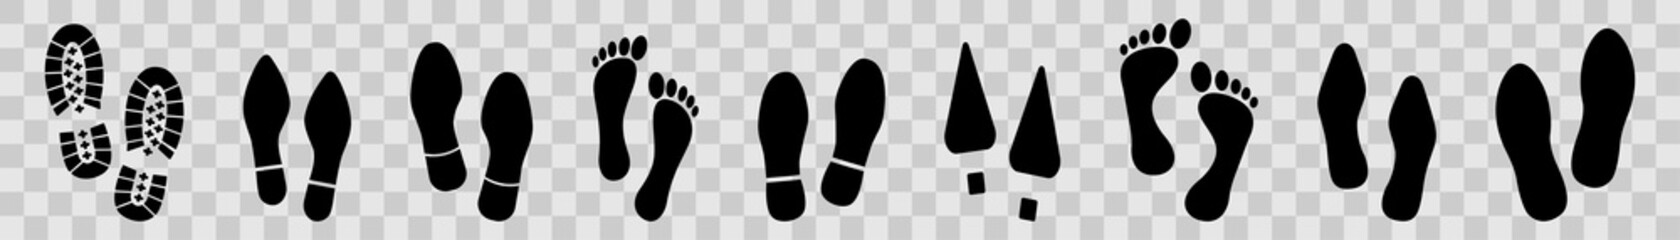 Collection of human footprints icon. Traces of human shoes. Steps.  Vector illustration